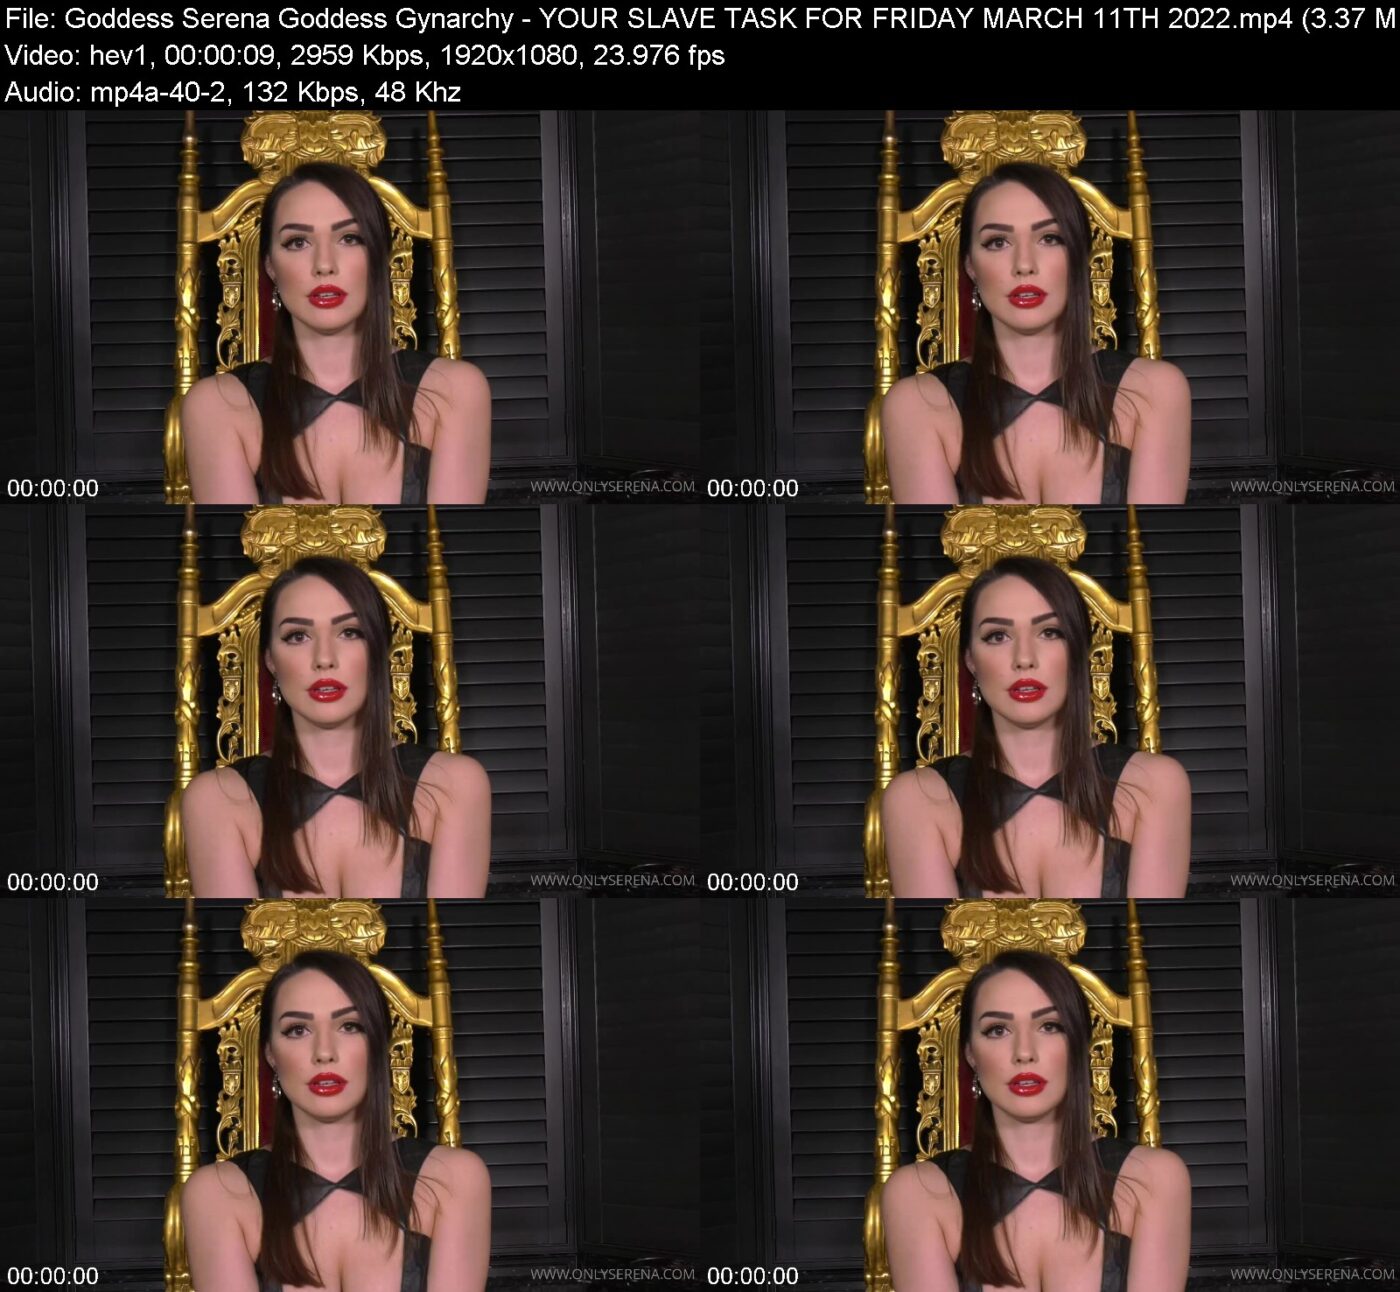 Actress: Goddess Serena Goddess Gynarchy. Title and Studio: YOUR SLAVE TASK FOR FRIDAY MARCH 11TH 2022